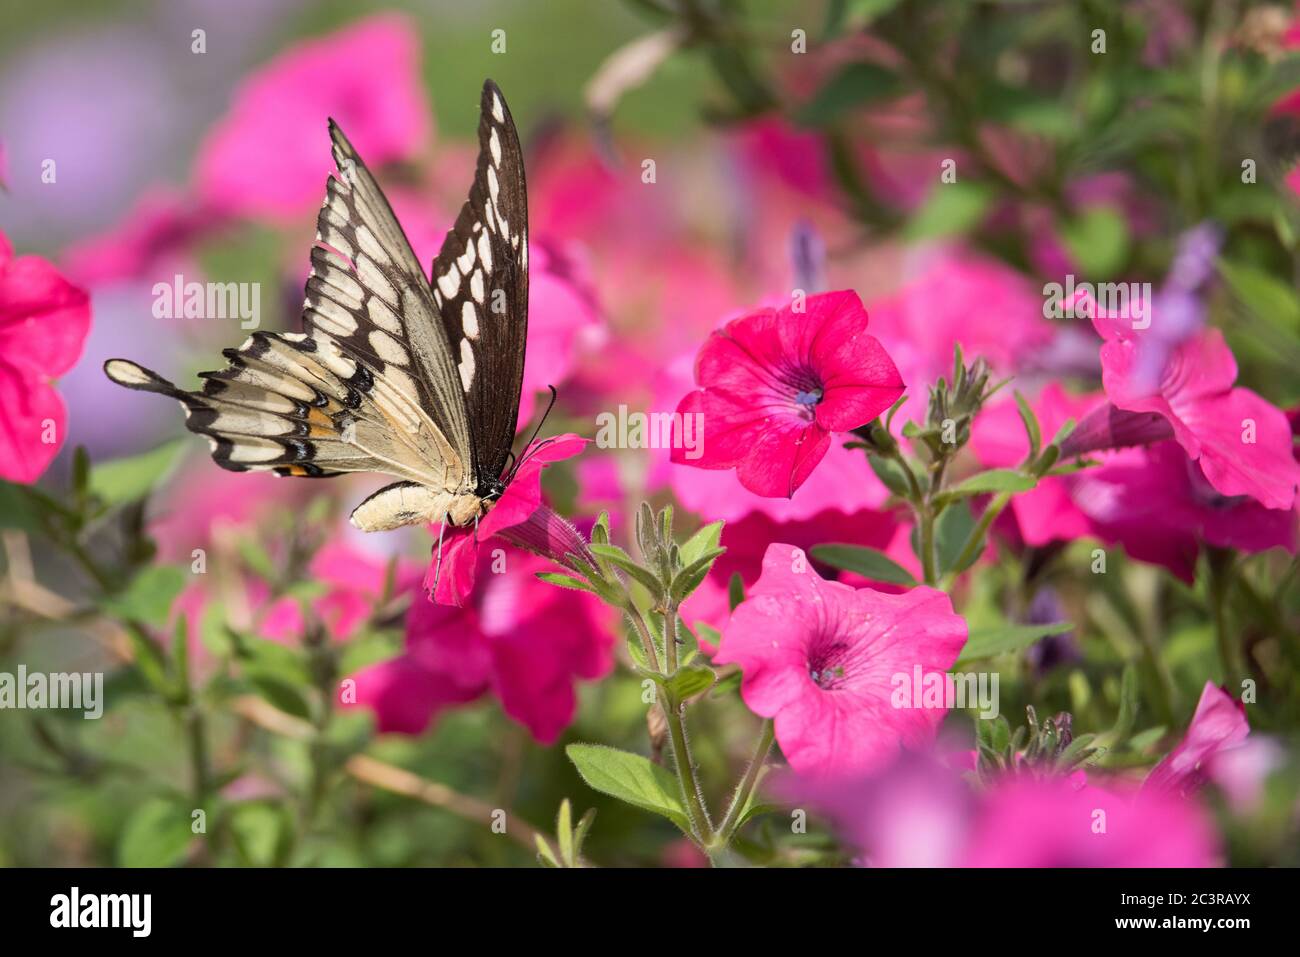 A Giant Swallowtail butterfly foages for nectar among the petunias at Toronto's Rosetta McClain Gardens. Stock Photo